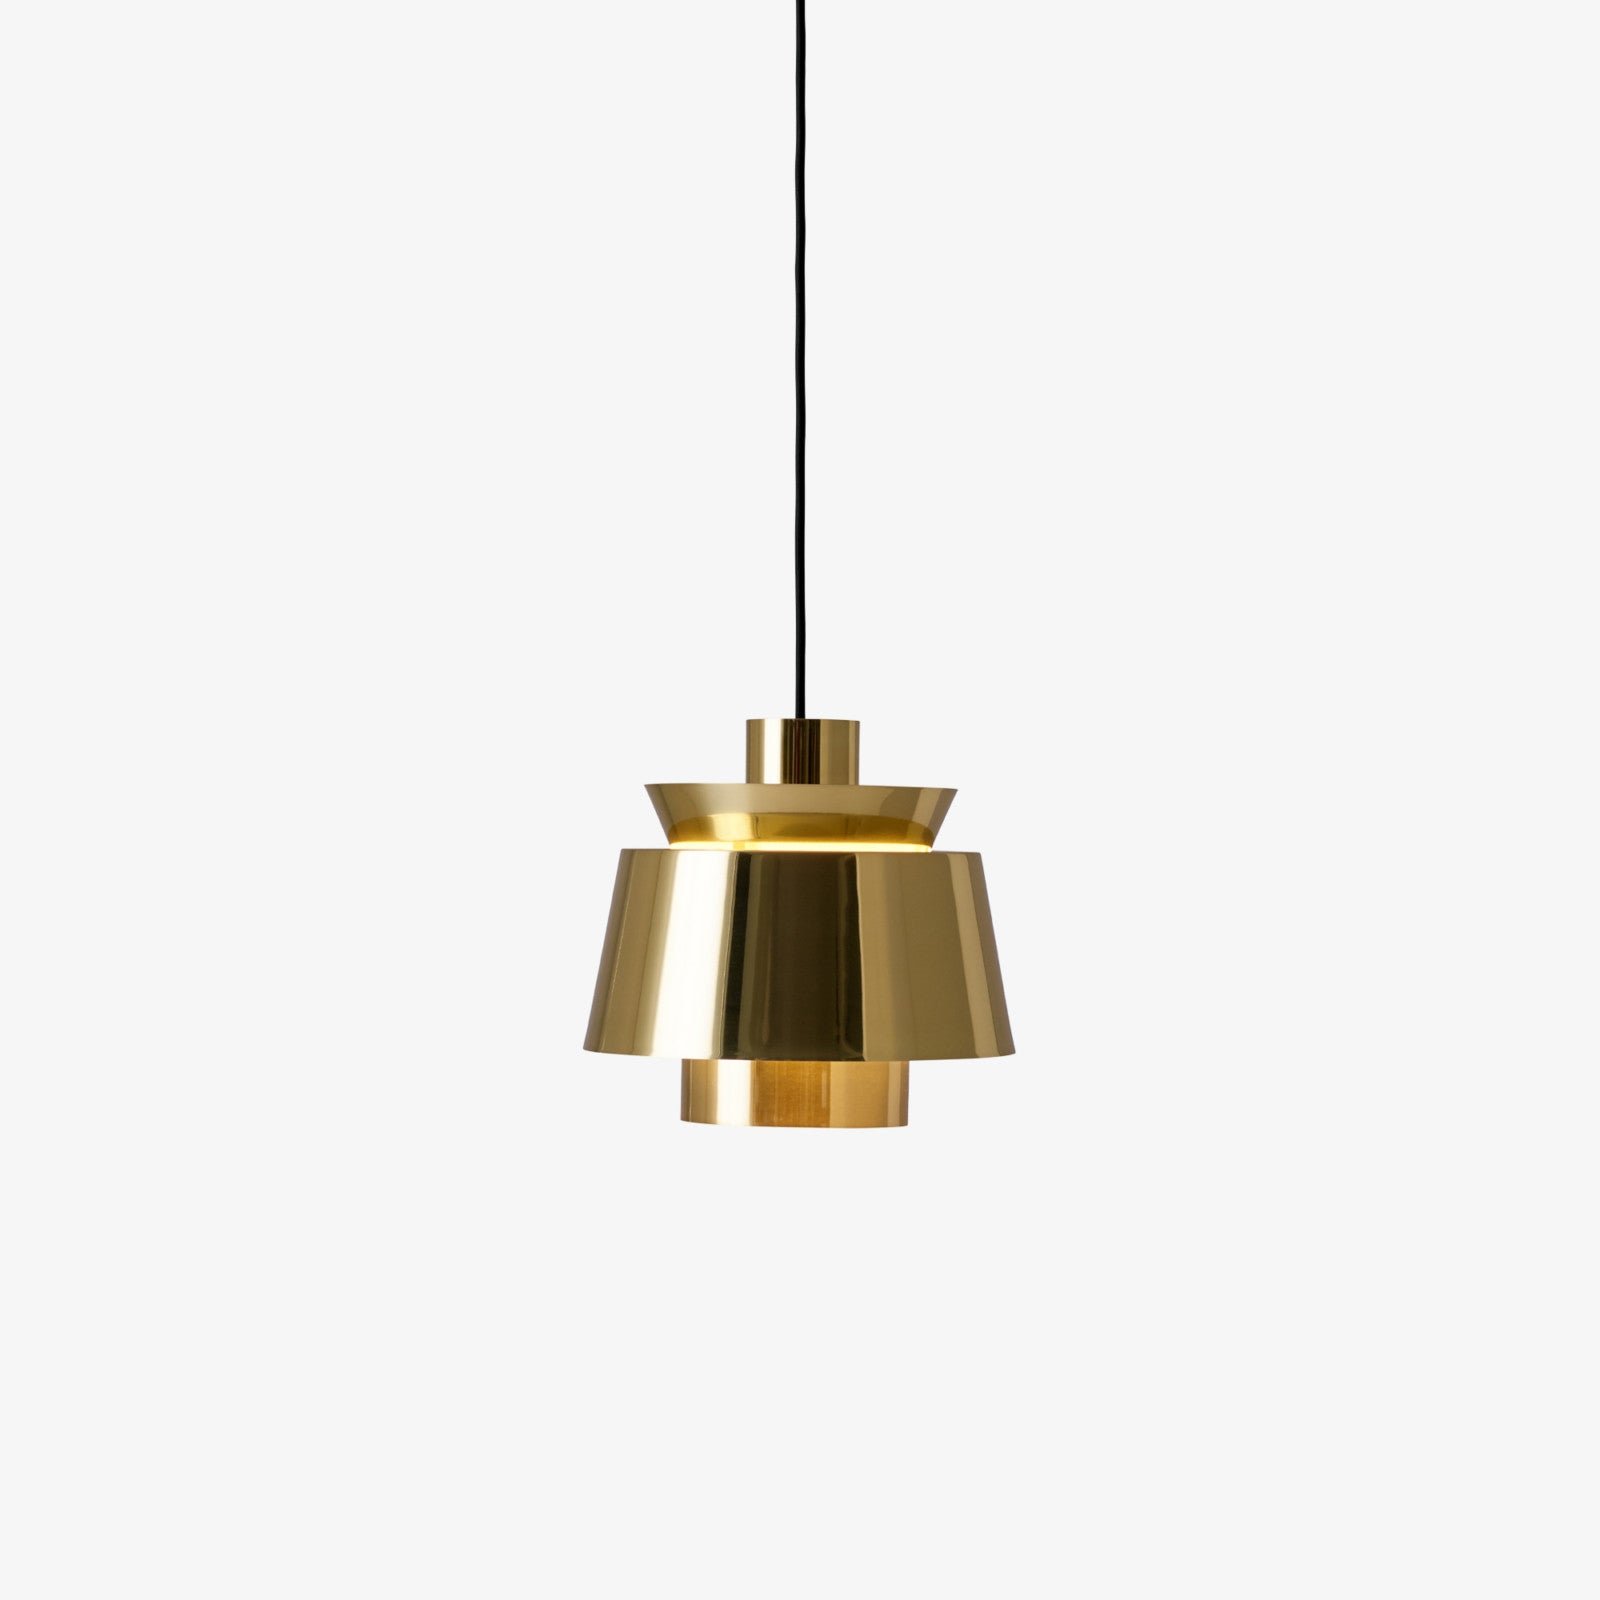 Pendant Light with Utzon Design, Copper Plated, Diameter 9.8 inches, Height 9.8 inches (25cm x 25cm)